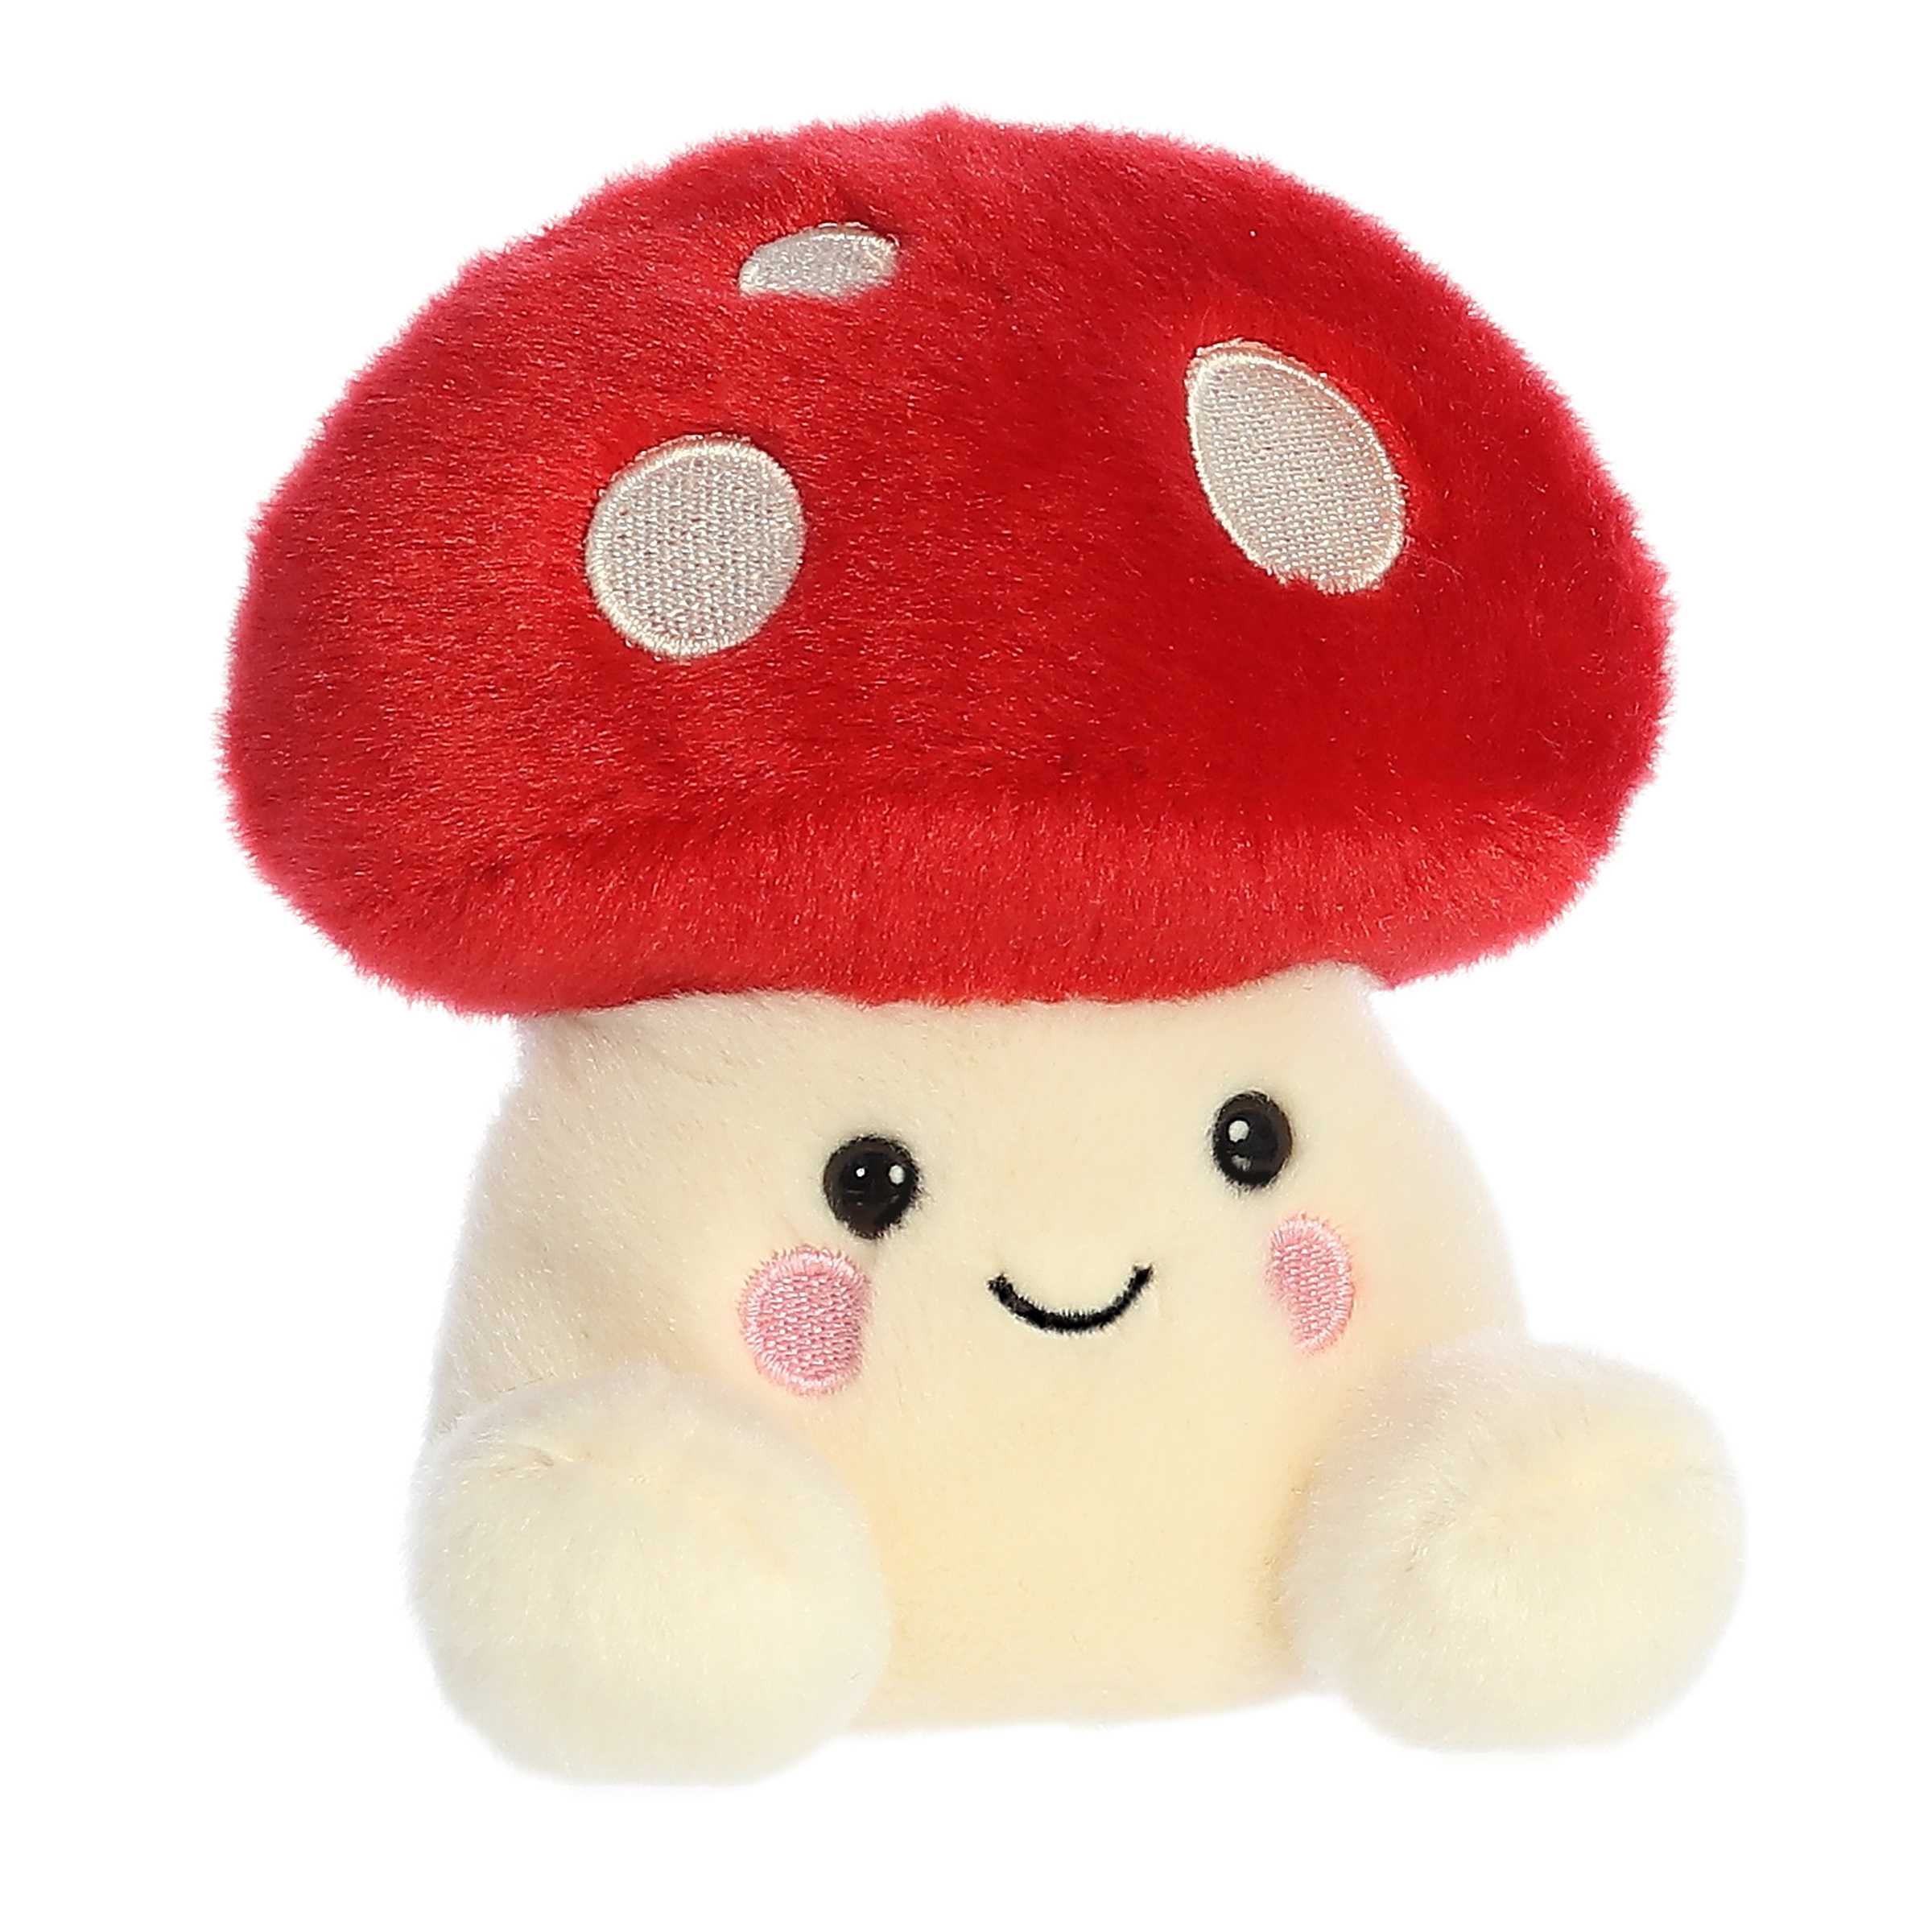 Aurora Plushie Toy. Jelly Cat look-a-ike.Each Palm Pal™ Amanita Mushroom baby gift Create a collection all of your own and curate the best band of Palm Pals™ that match your style. With the collection always growing, there's a palm pal for everyone.Enjoy free shipping to Canada and the US on orders over $100. For orders below $100, standard shipping rates apply: $6 CAD for Canada and $4.30 USD for the US. Duties Included. Affordable toy.gift for all ages.